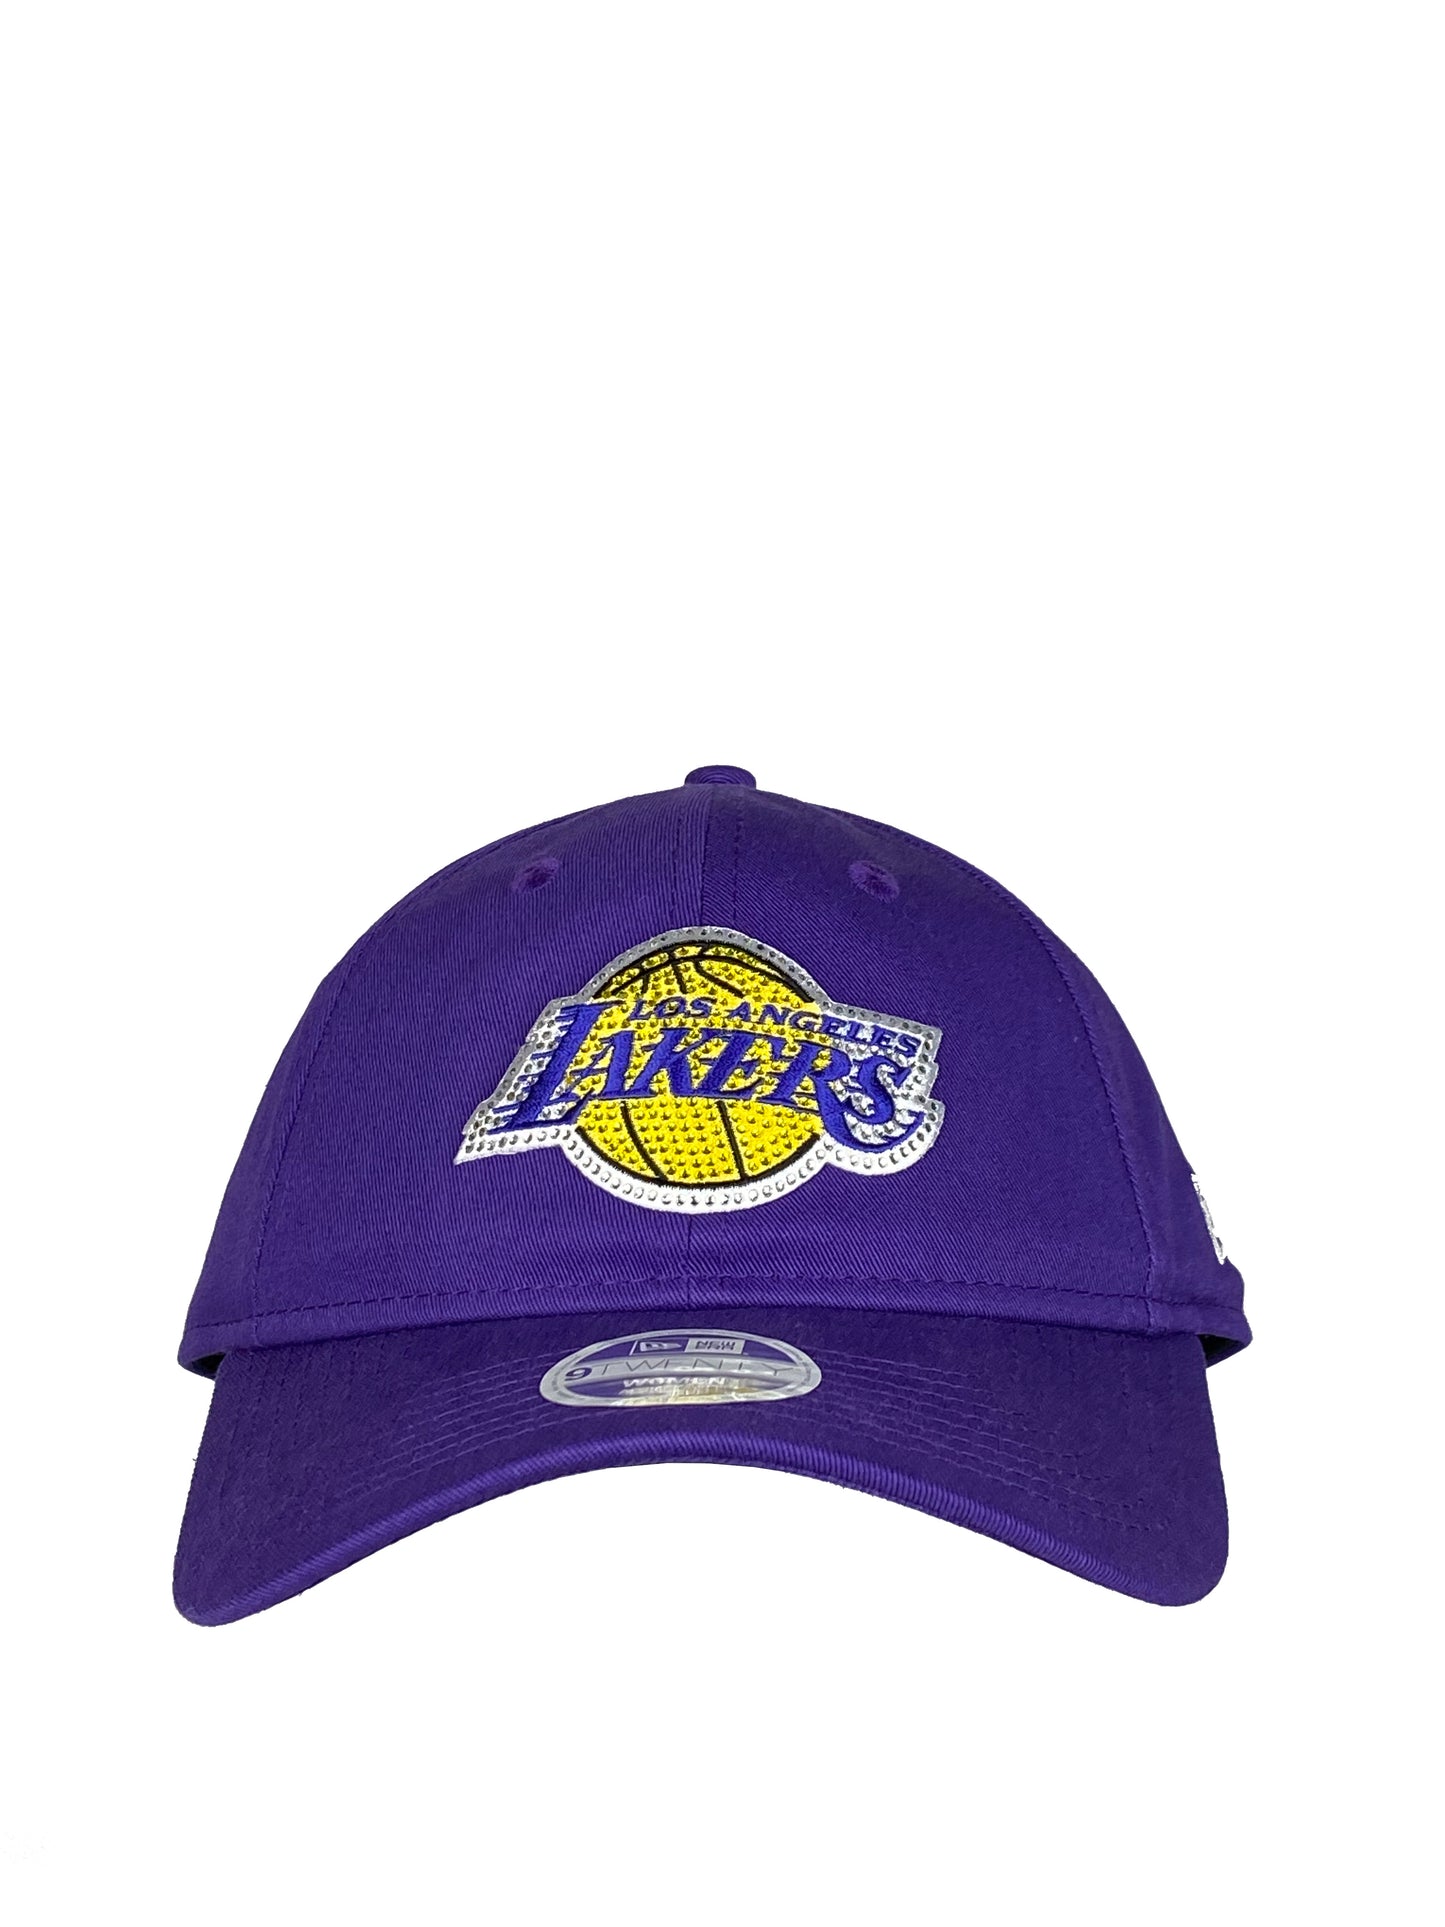 LOS ANGELES LAKERS MUJER DAZZLE 920